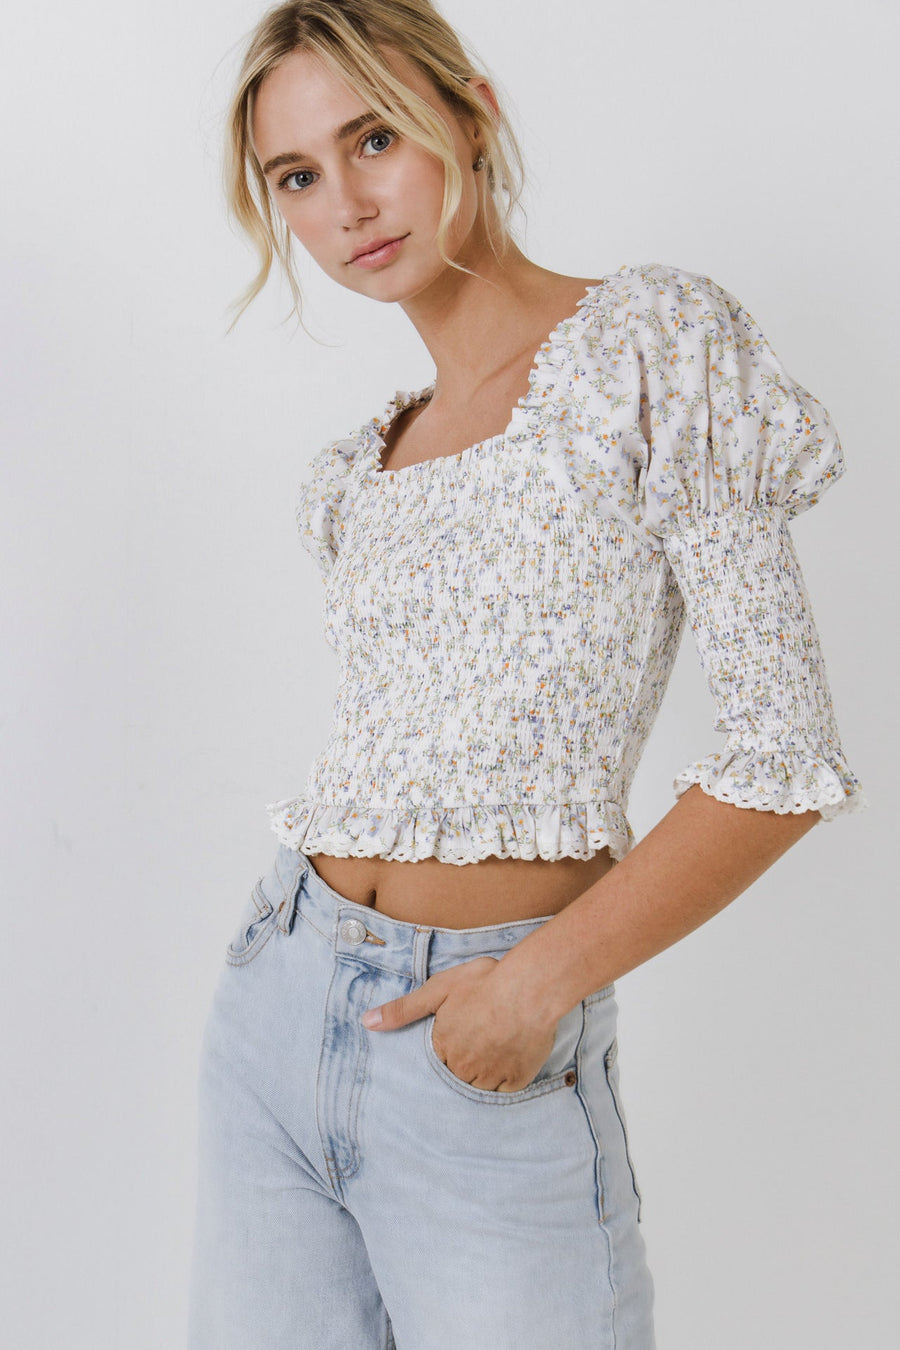 FREE THE ROSES-Smocked Sleeved Puff Sleeve Ruffled Top-TOPS available at Objectrare